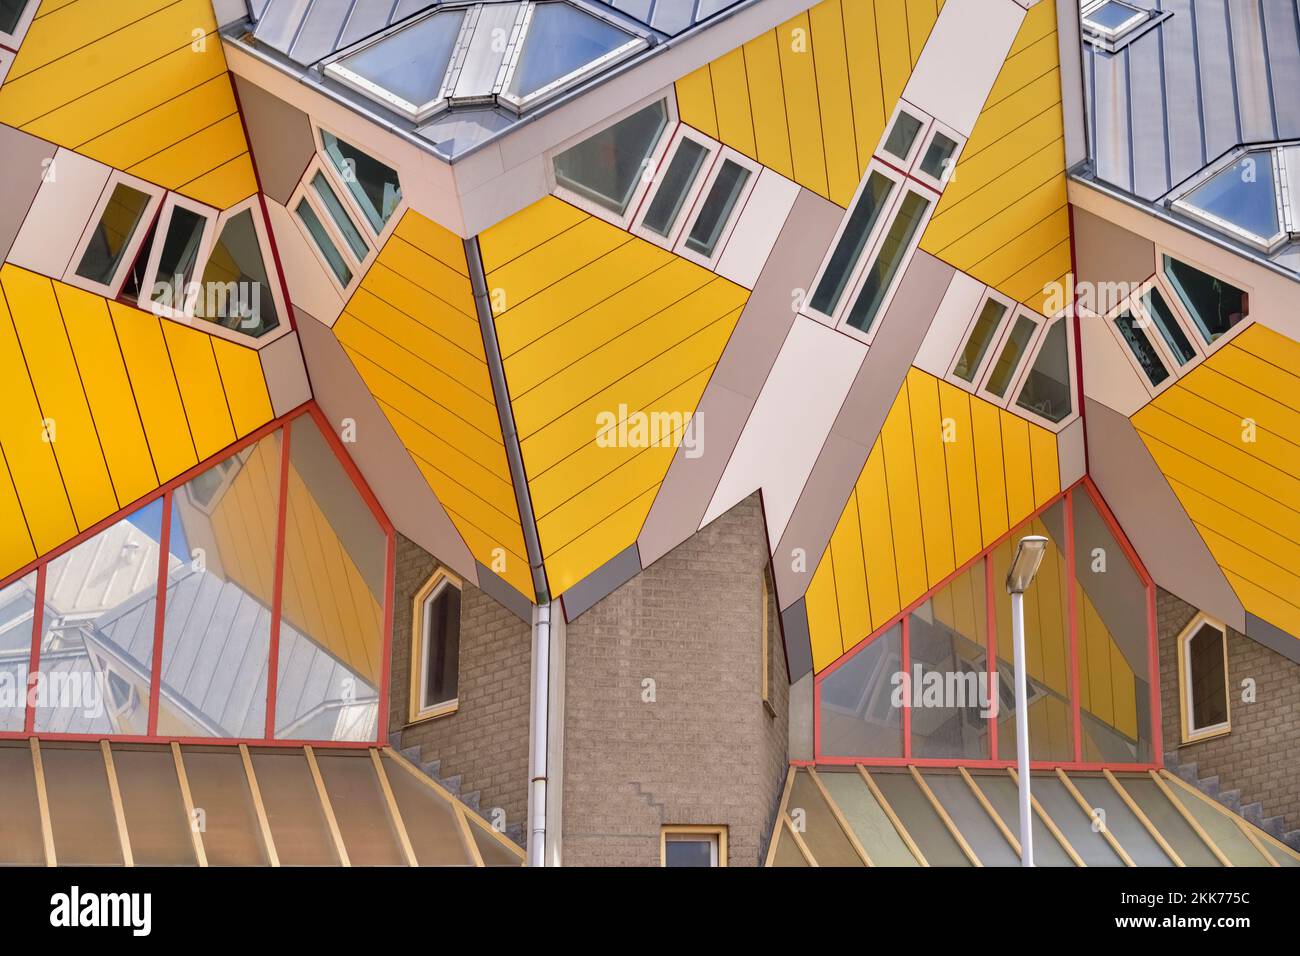 Holland, Rotterdam, The Cube Houses, an innovative housing development where each house is a cube tilted over by 45 degrees, designed by Dutch architect Piet Blom and bult between 1977 and 1984, Abstract patterns in the central area. Stock Photo